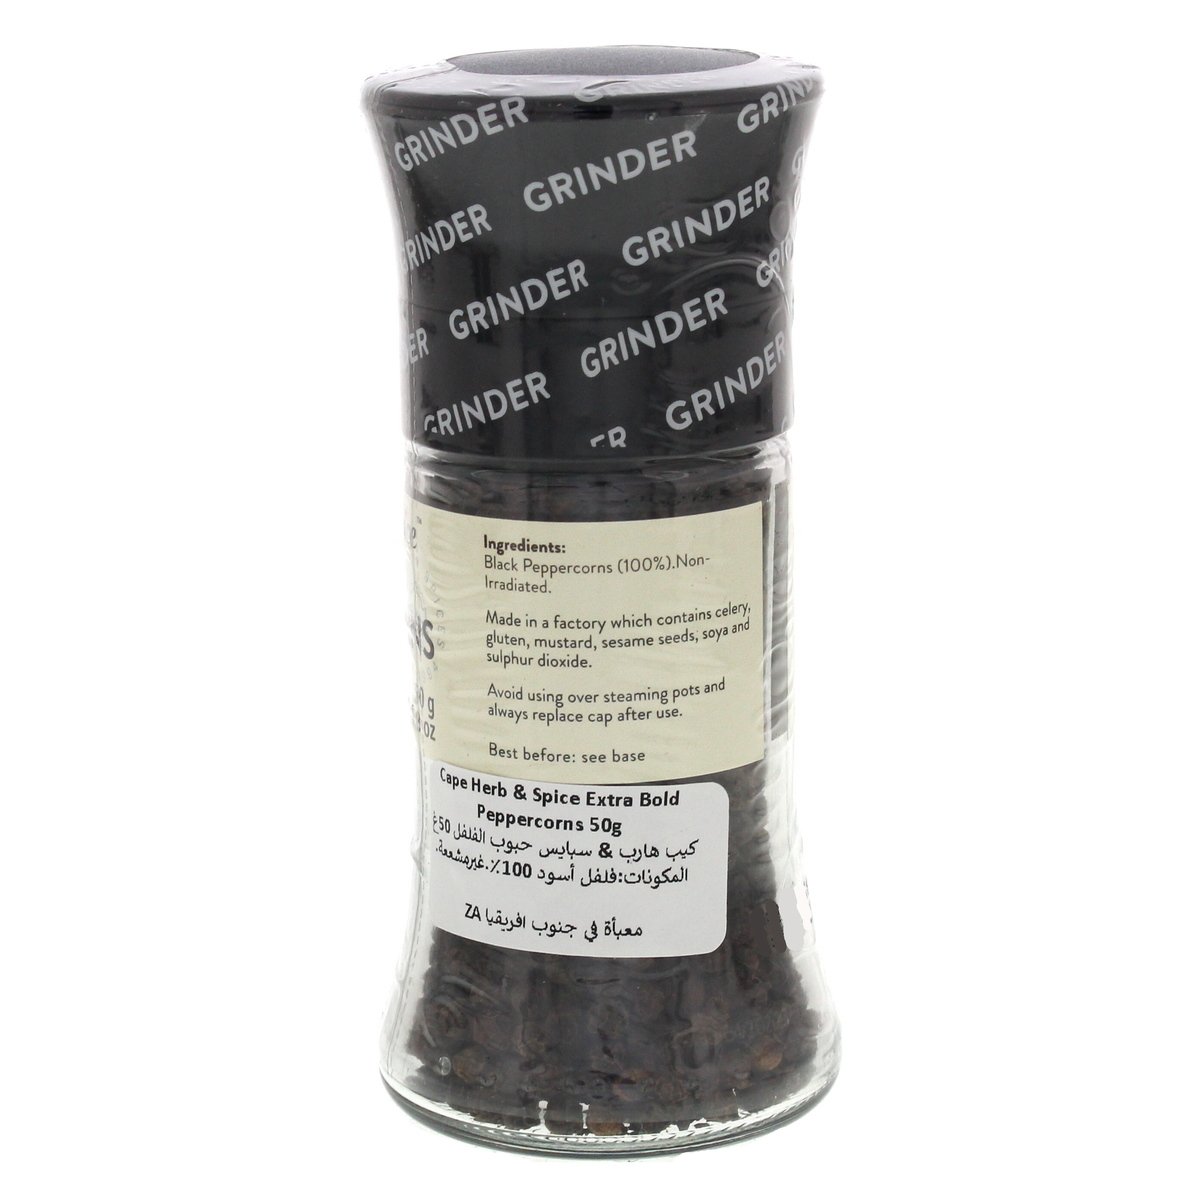 Cape Herb & Spice Extra Bold Peppercorn 50 g